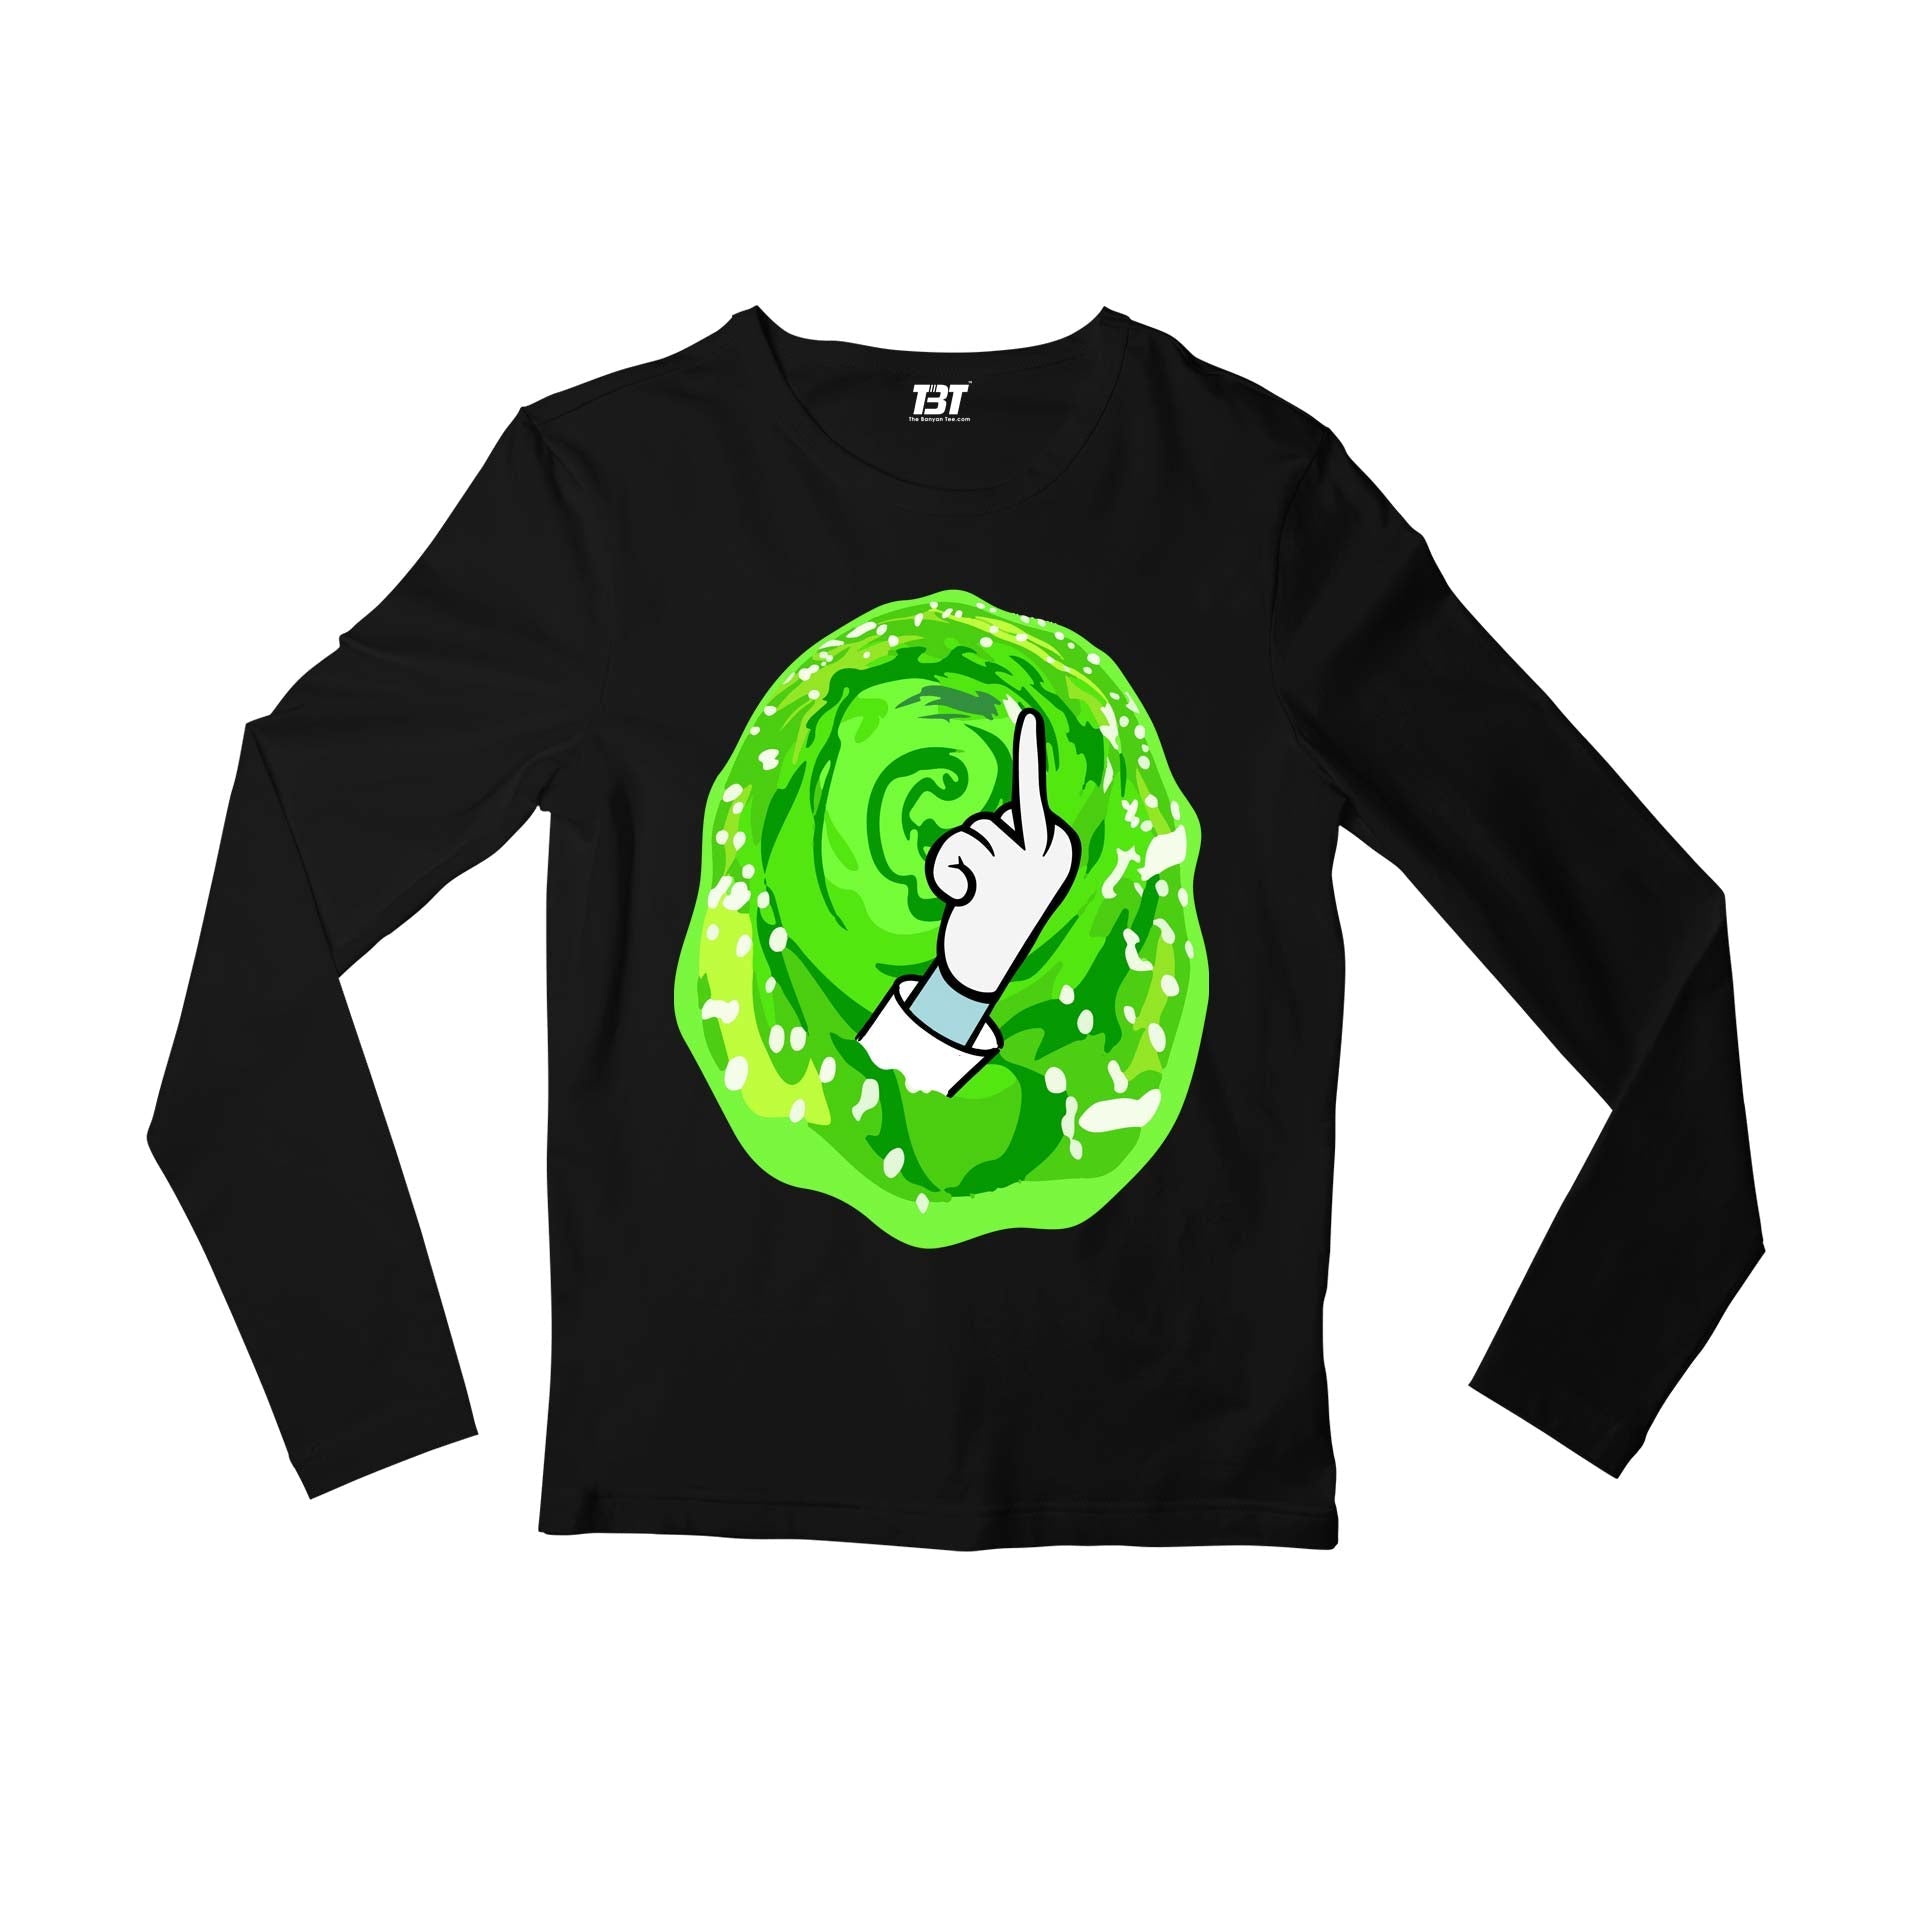 rick and morty intergalactic screw full sleeves long sleeves buy online india the banyan tee tbt men women girls boys unisex black rick and morty online summer beth mr meeseeks jerry quote vector art clothing accessories merchandise